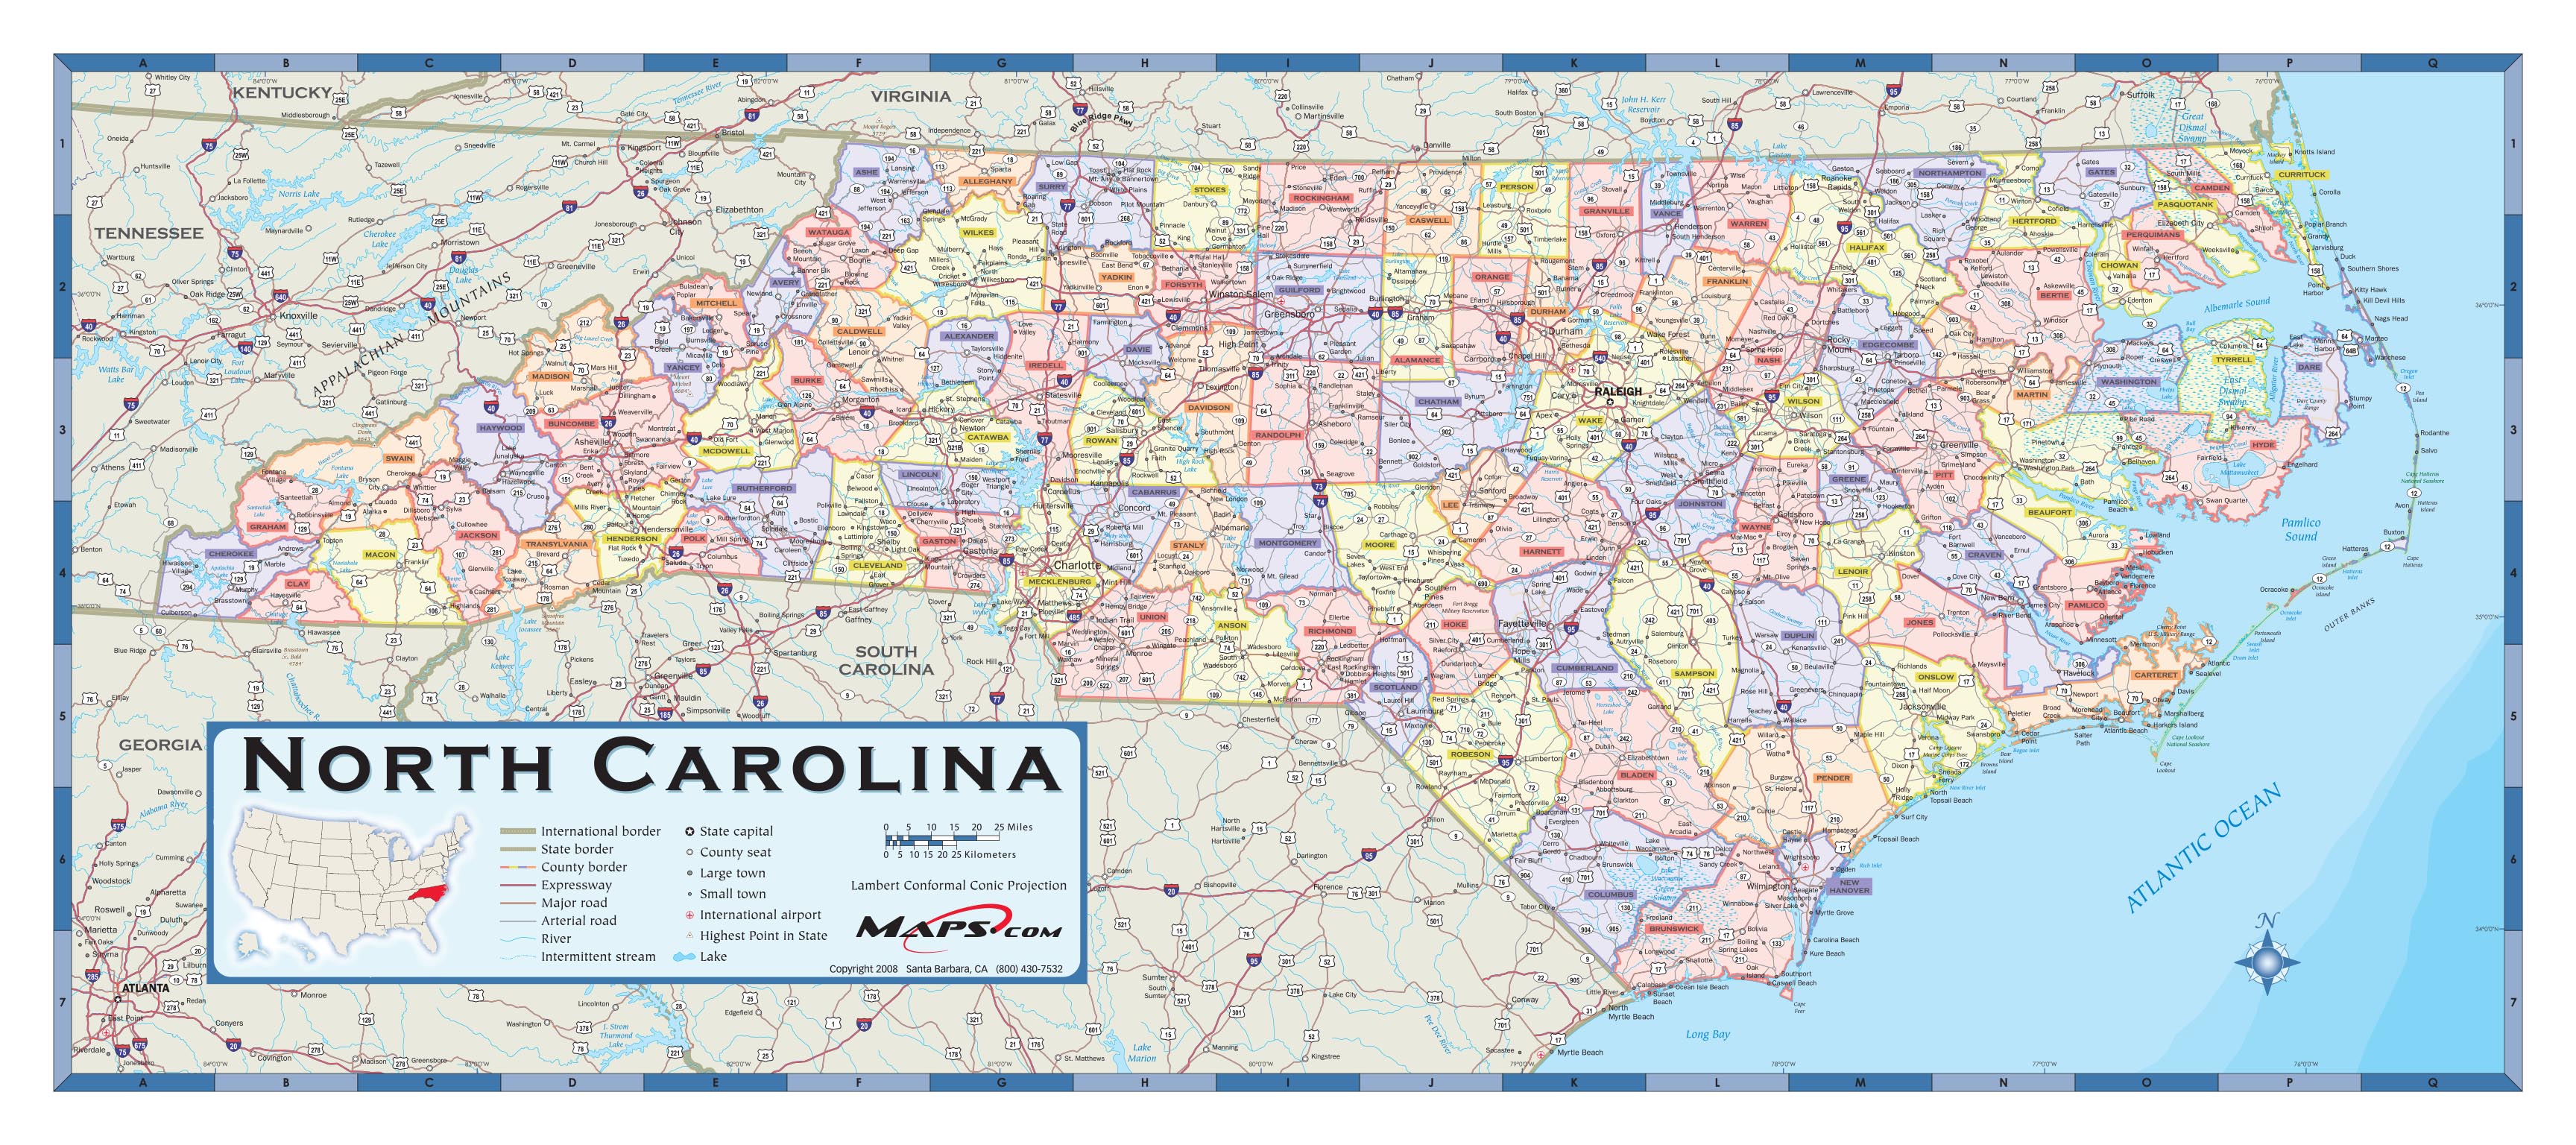 North Carolina Counties Wall Map by Maps.com - MapSales